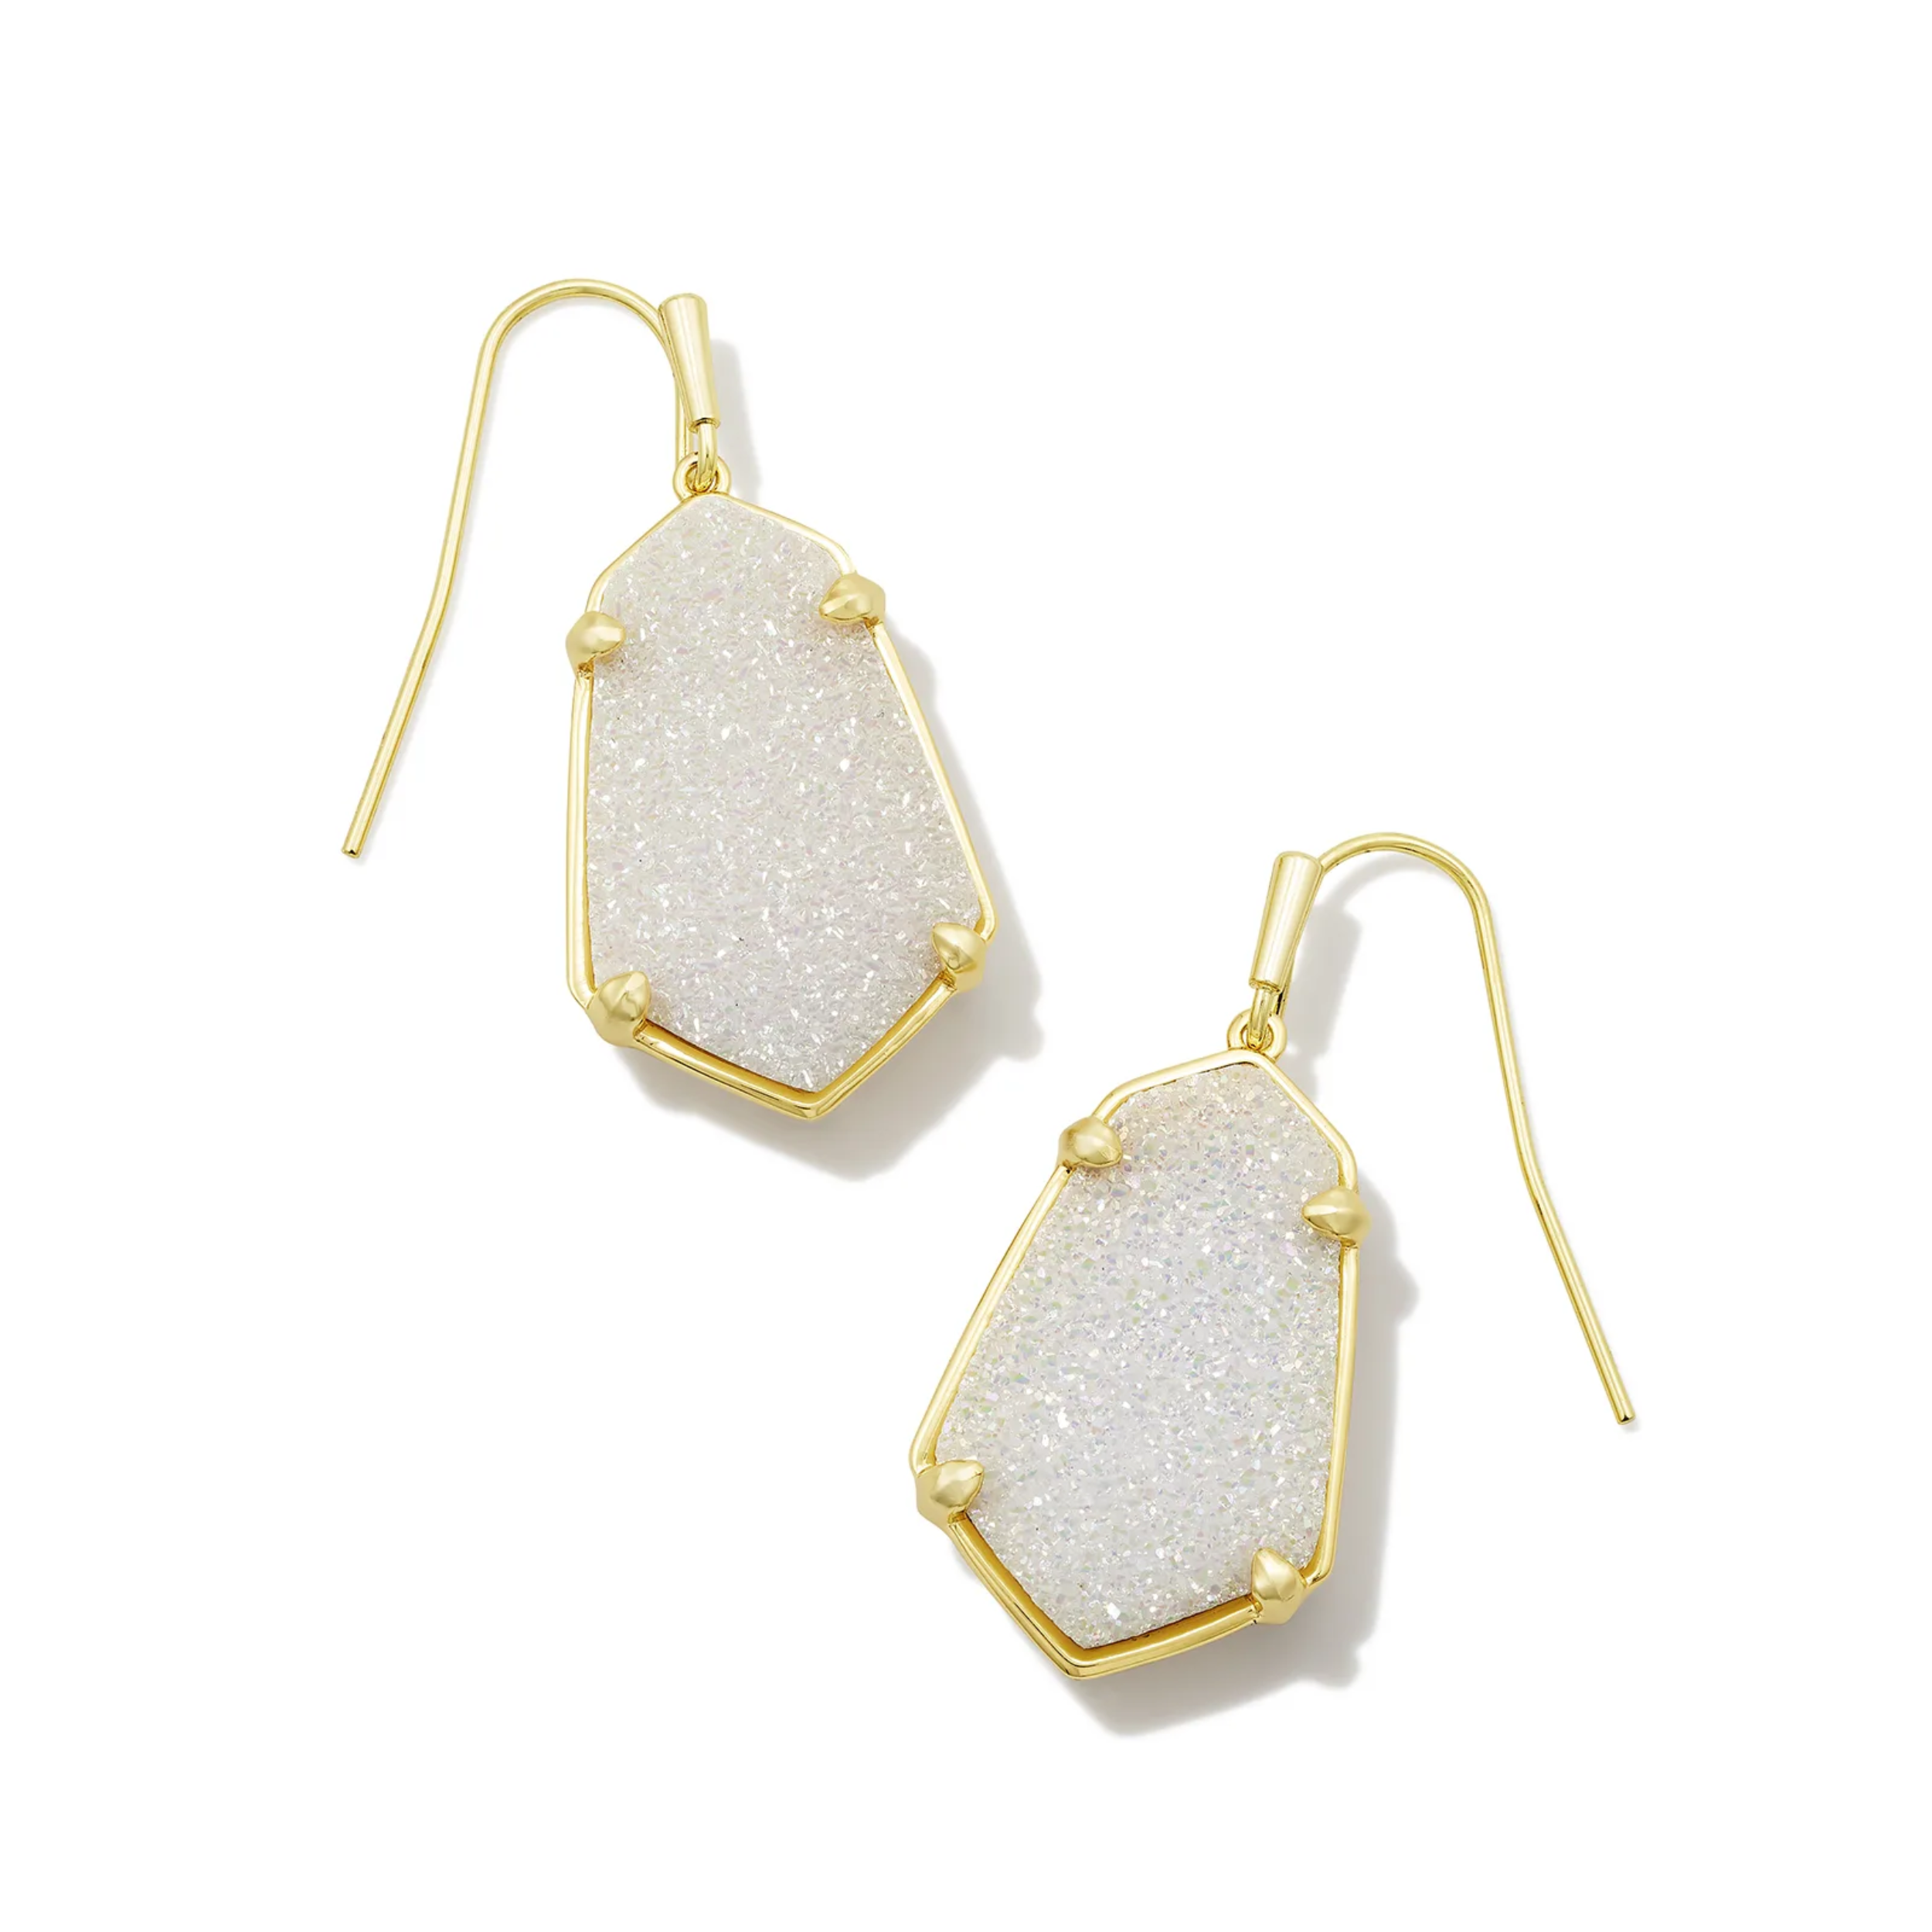 These Alexandria Gold Drop Earrings in Iridescent Drusy are pictured on a white background.